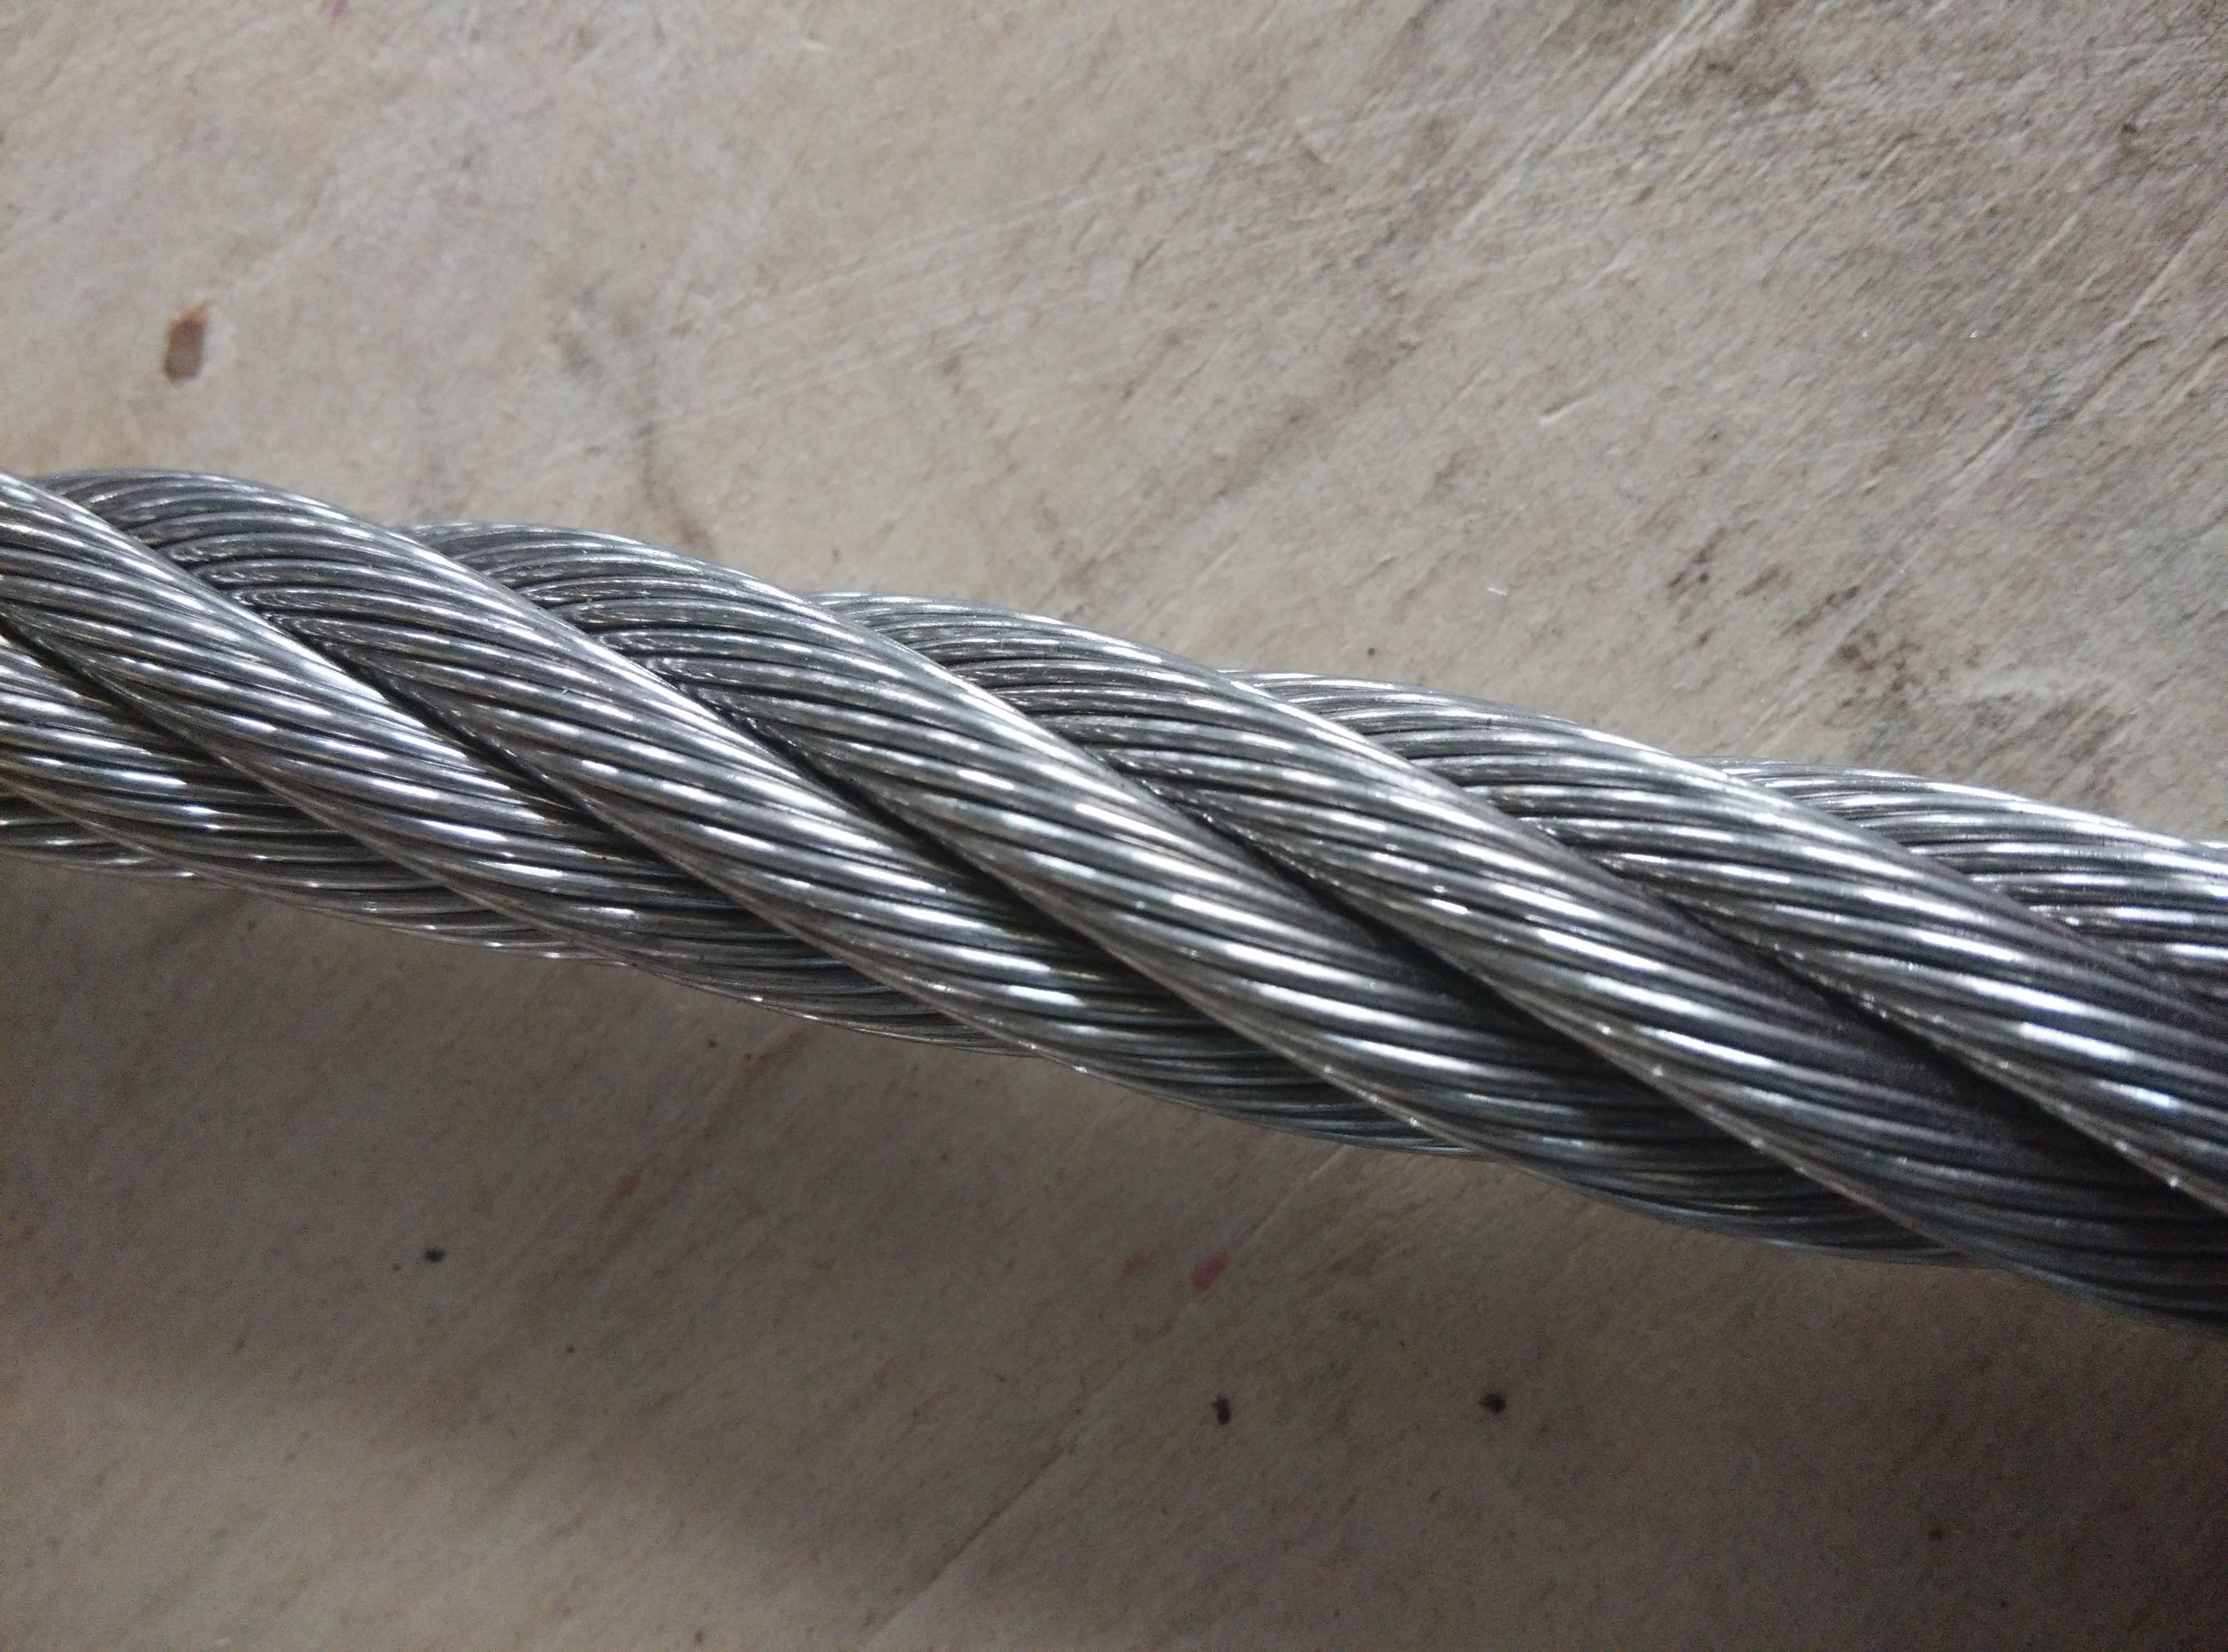 Buy cheap Sell galvanized wire rope 7x19(Extra Flexible) from wholesalers